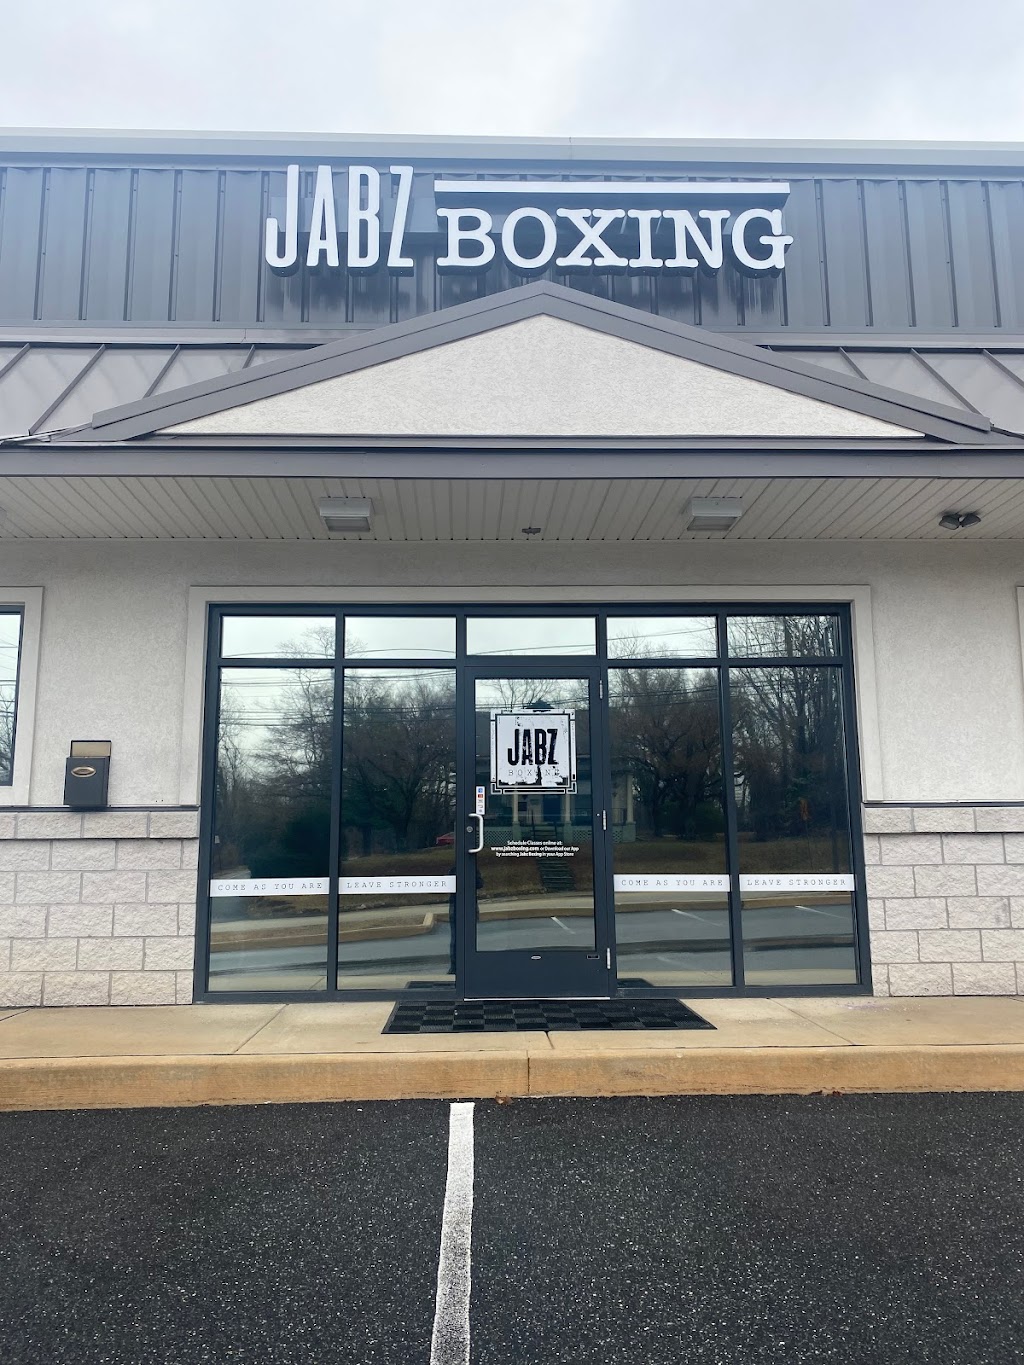 Jabz Boxing - Ridley Park | 611 N Swarthmore Ave suite a, Ridley Park, PA 19078 | Phone: (484) 494-6174